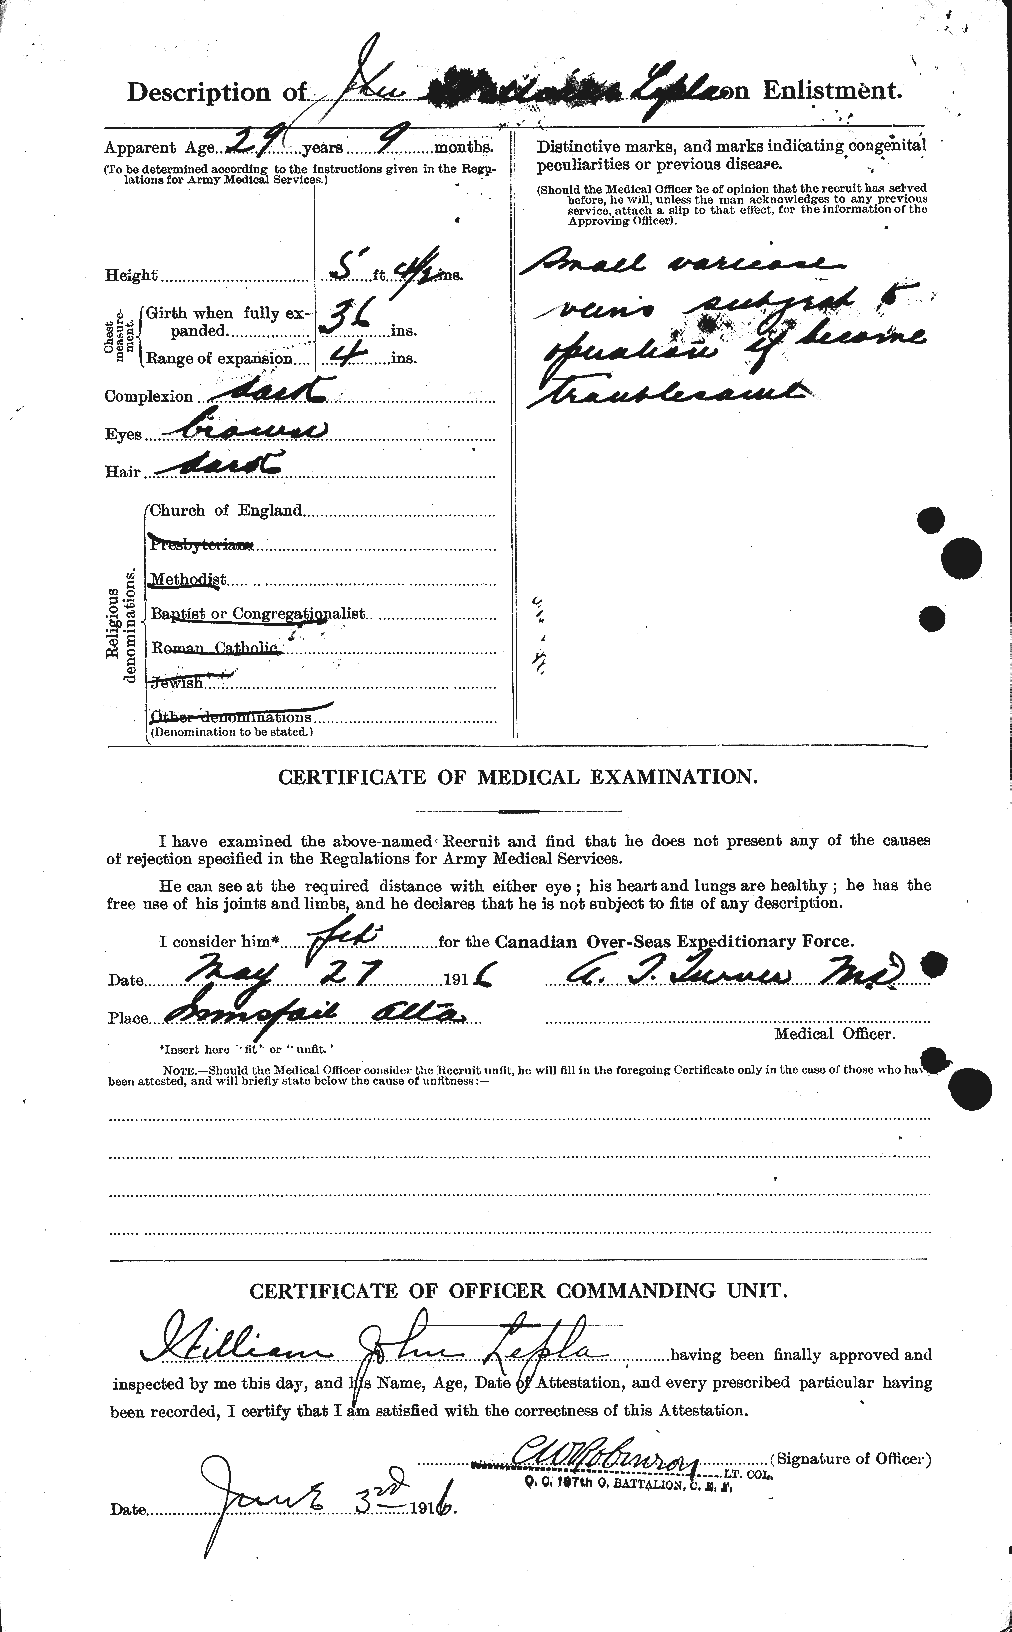 Personnel Records of the First World War - CEF 462962b